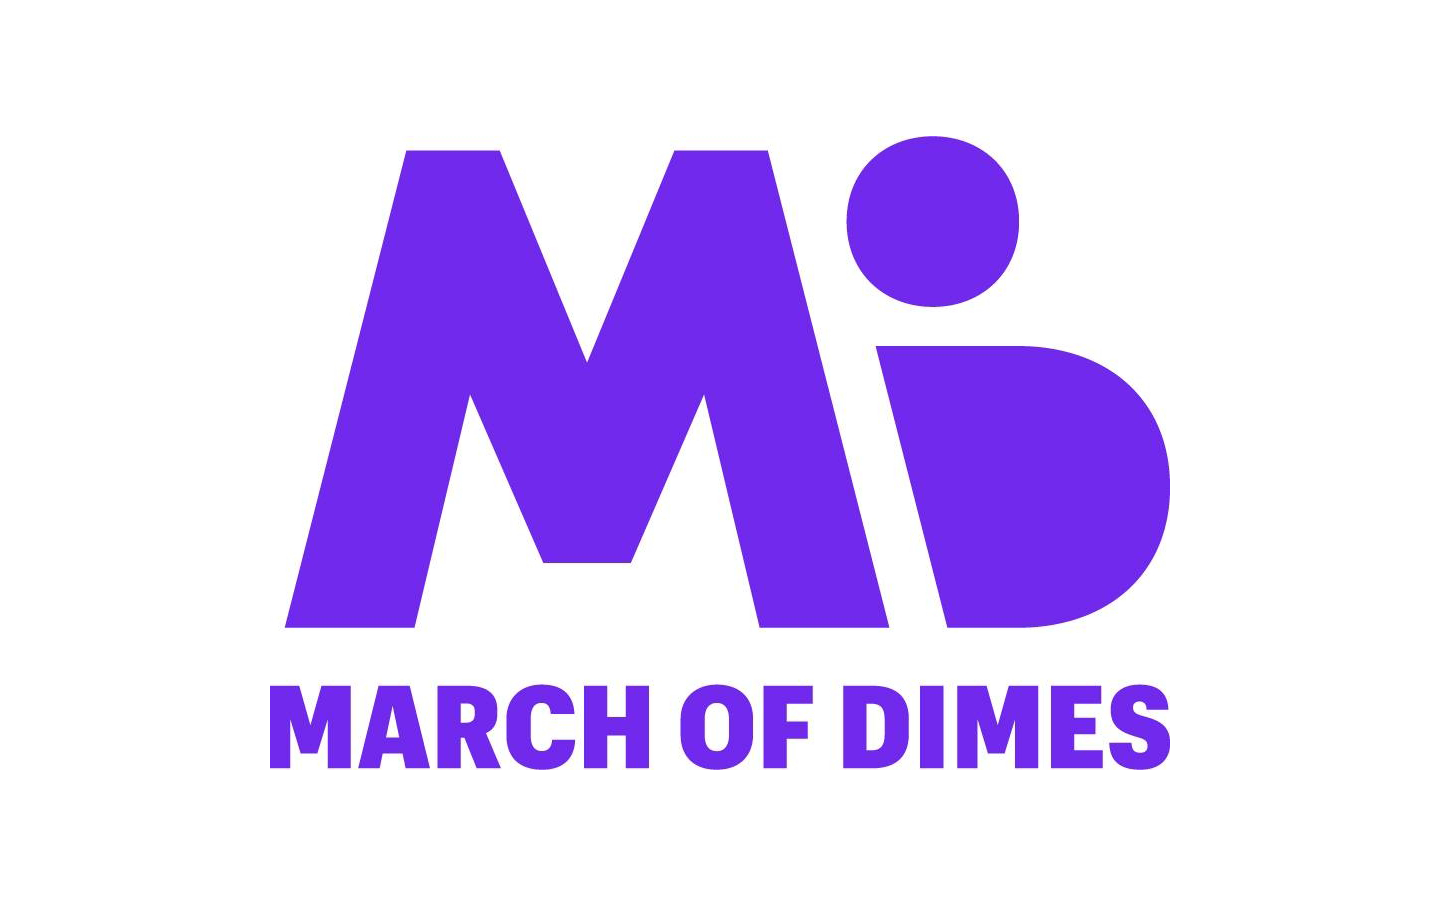 Dr. Lori Jerina and Gracie Kliegl receive nominations for the March of Dimes Nurse of the Year awards. 